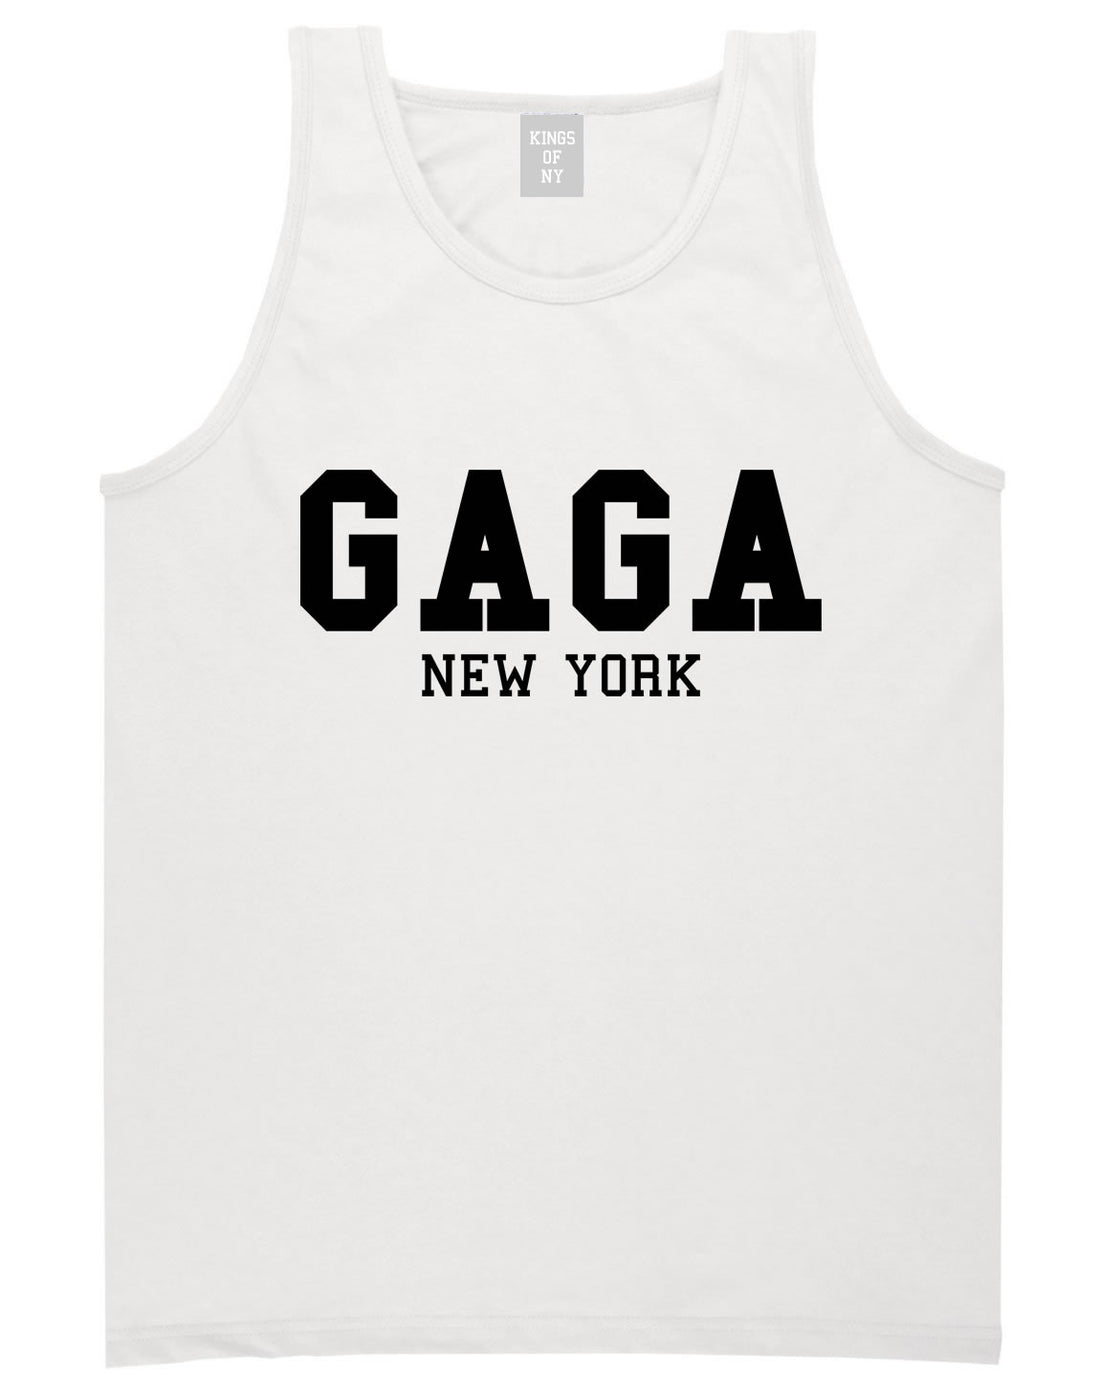 Gaga New York Tank Top in White by Kings Of NY